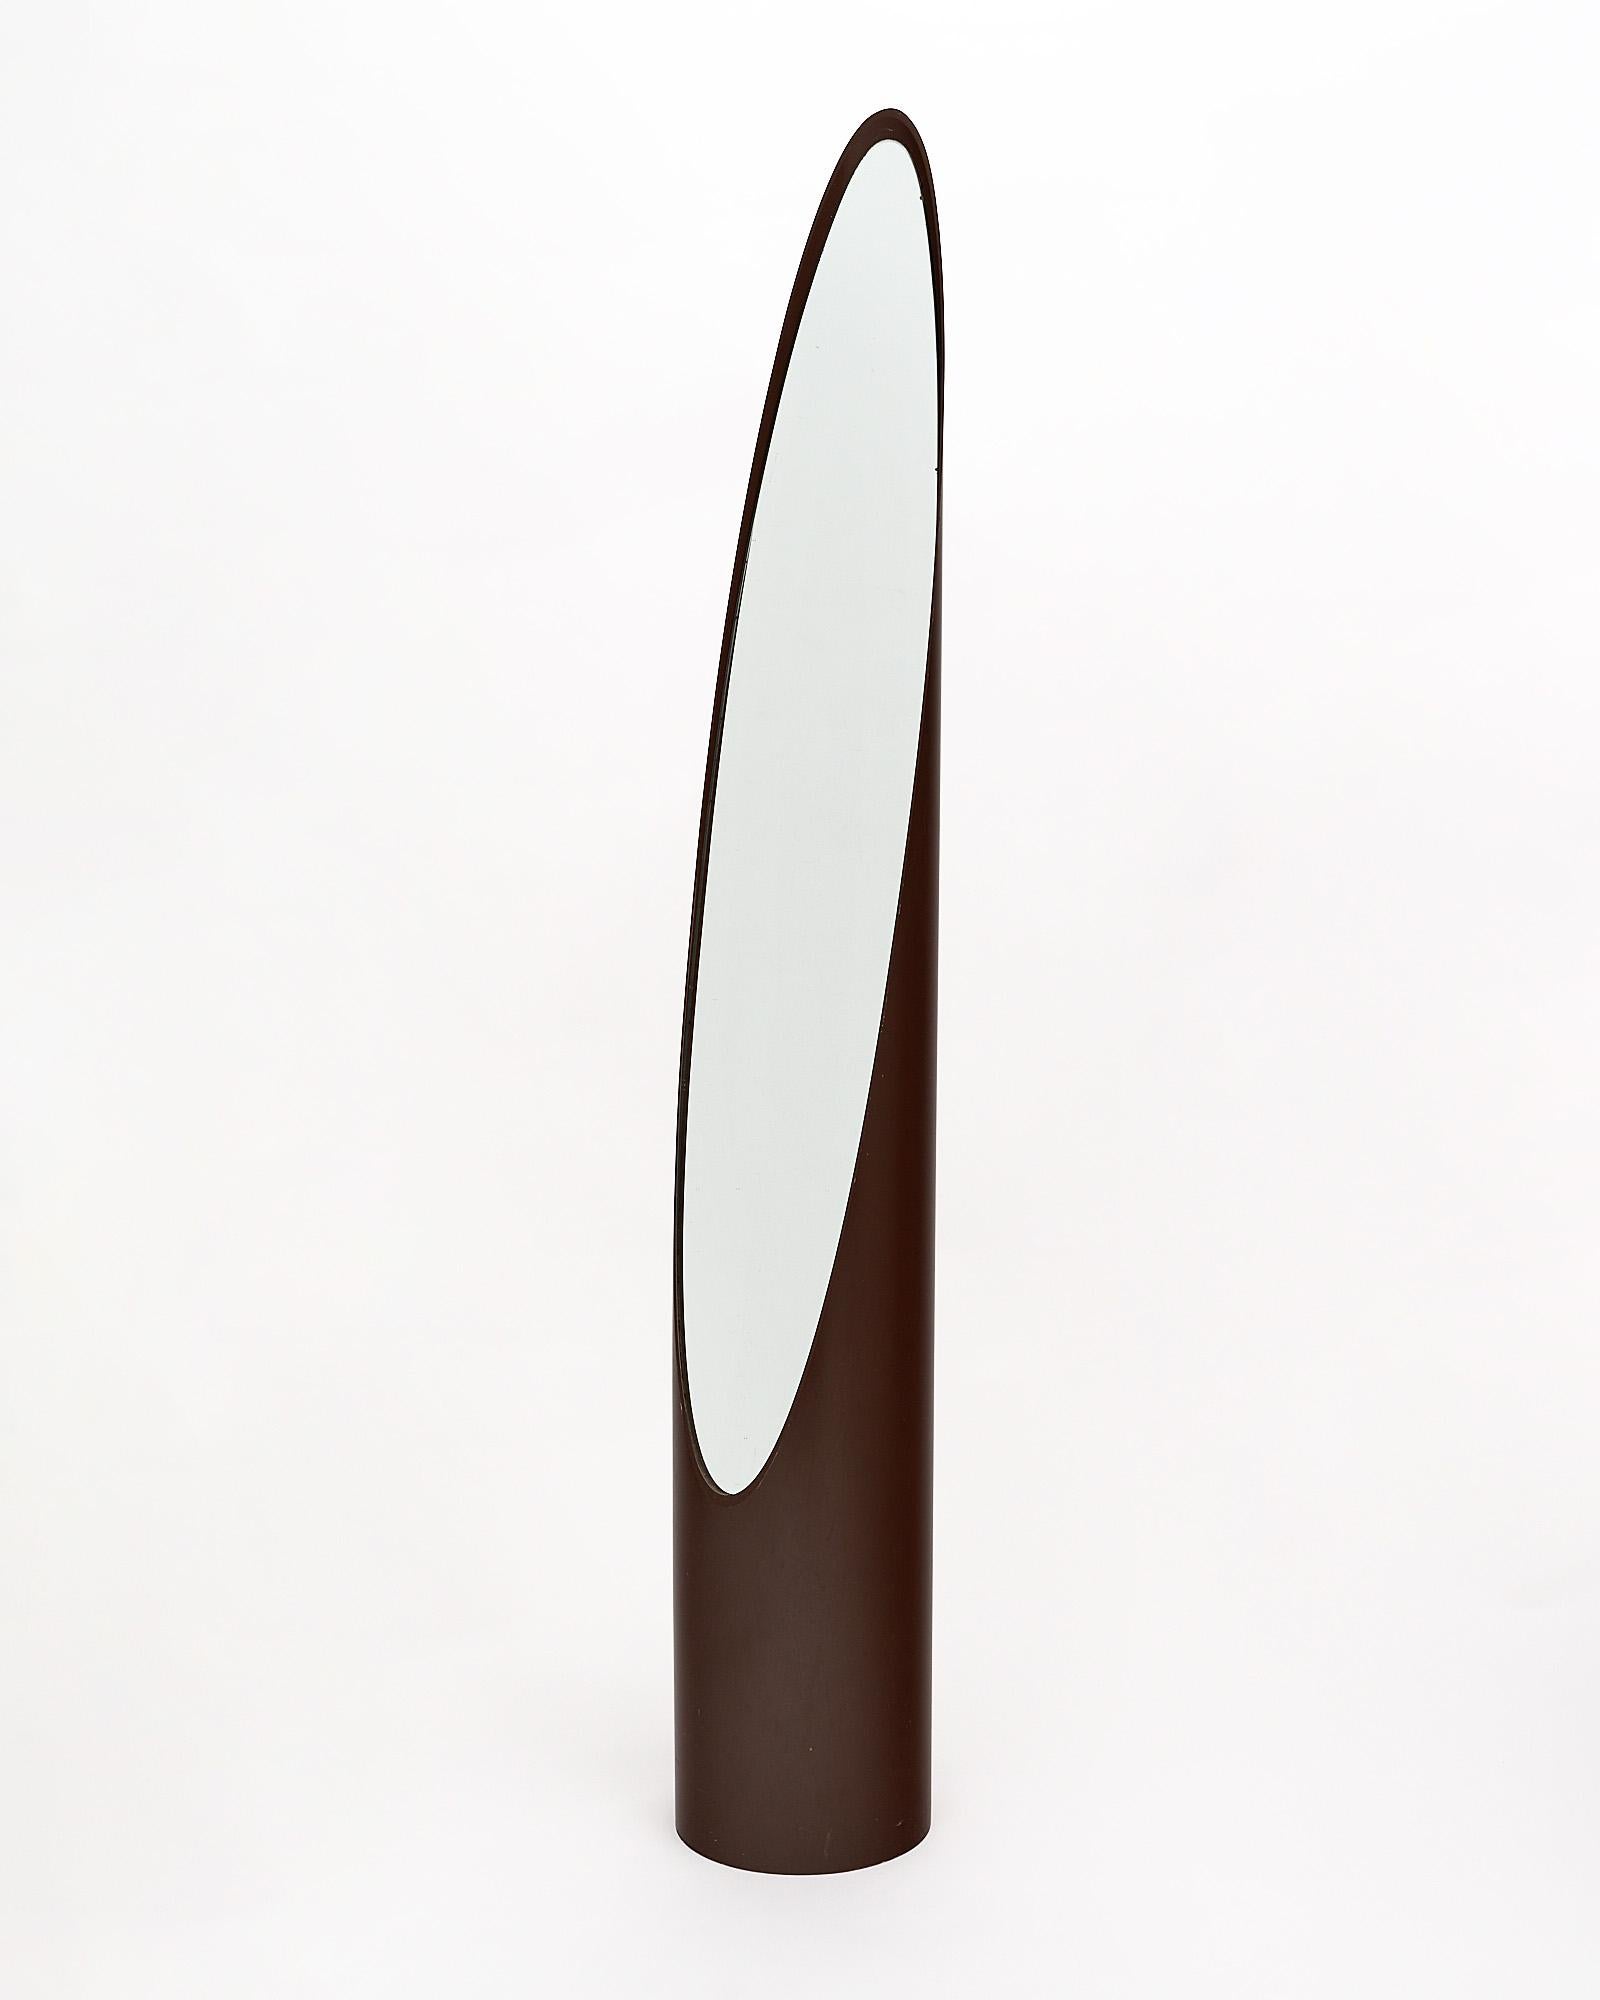 Unghia lipstick mirror by Rodolfo Bonetto made with a brown acrylic case and original oblong mirror.